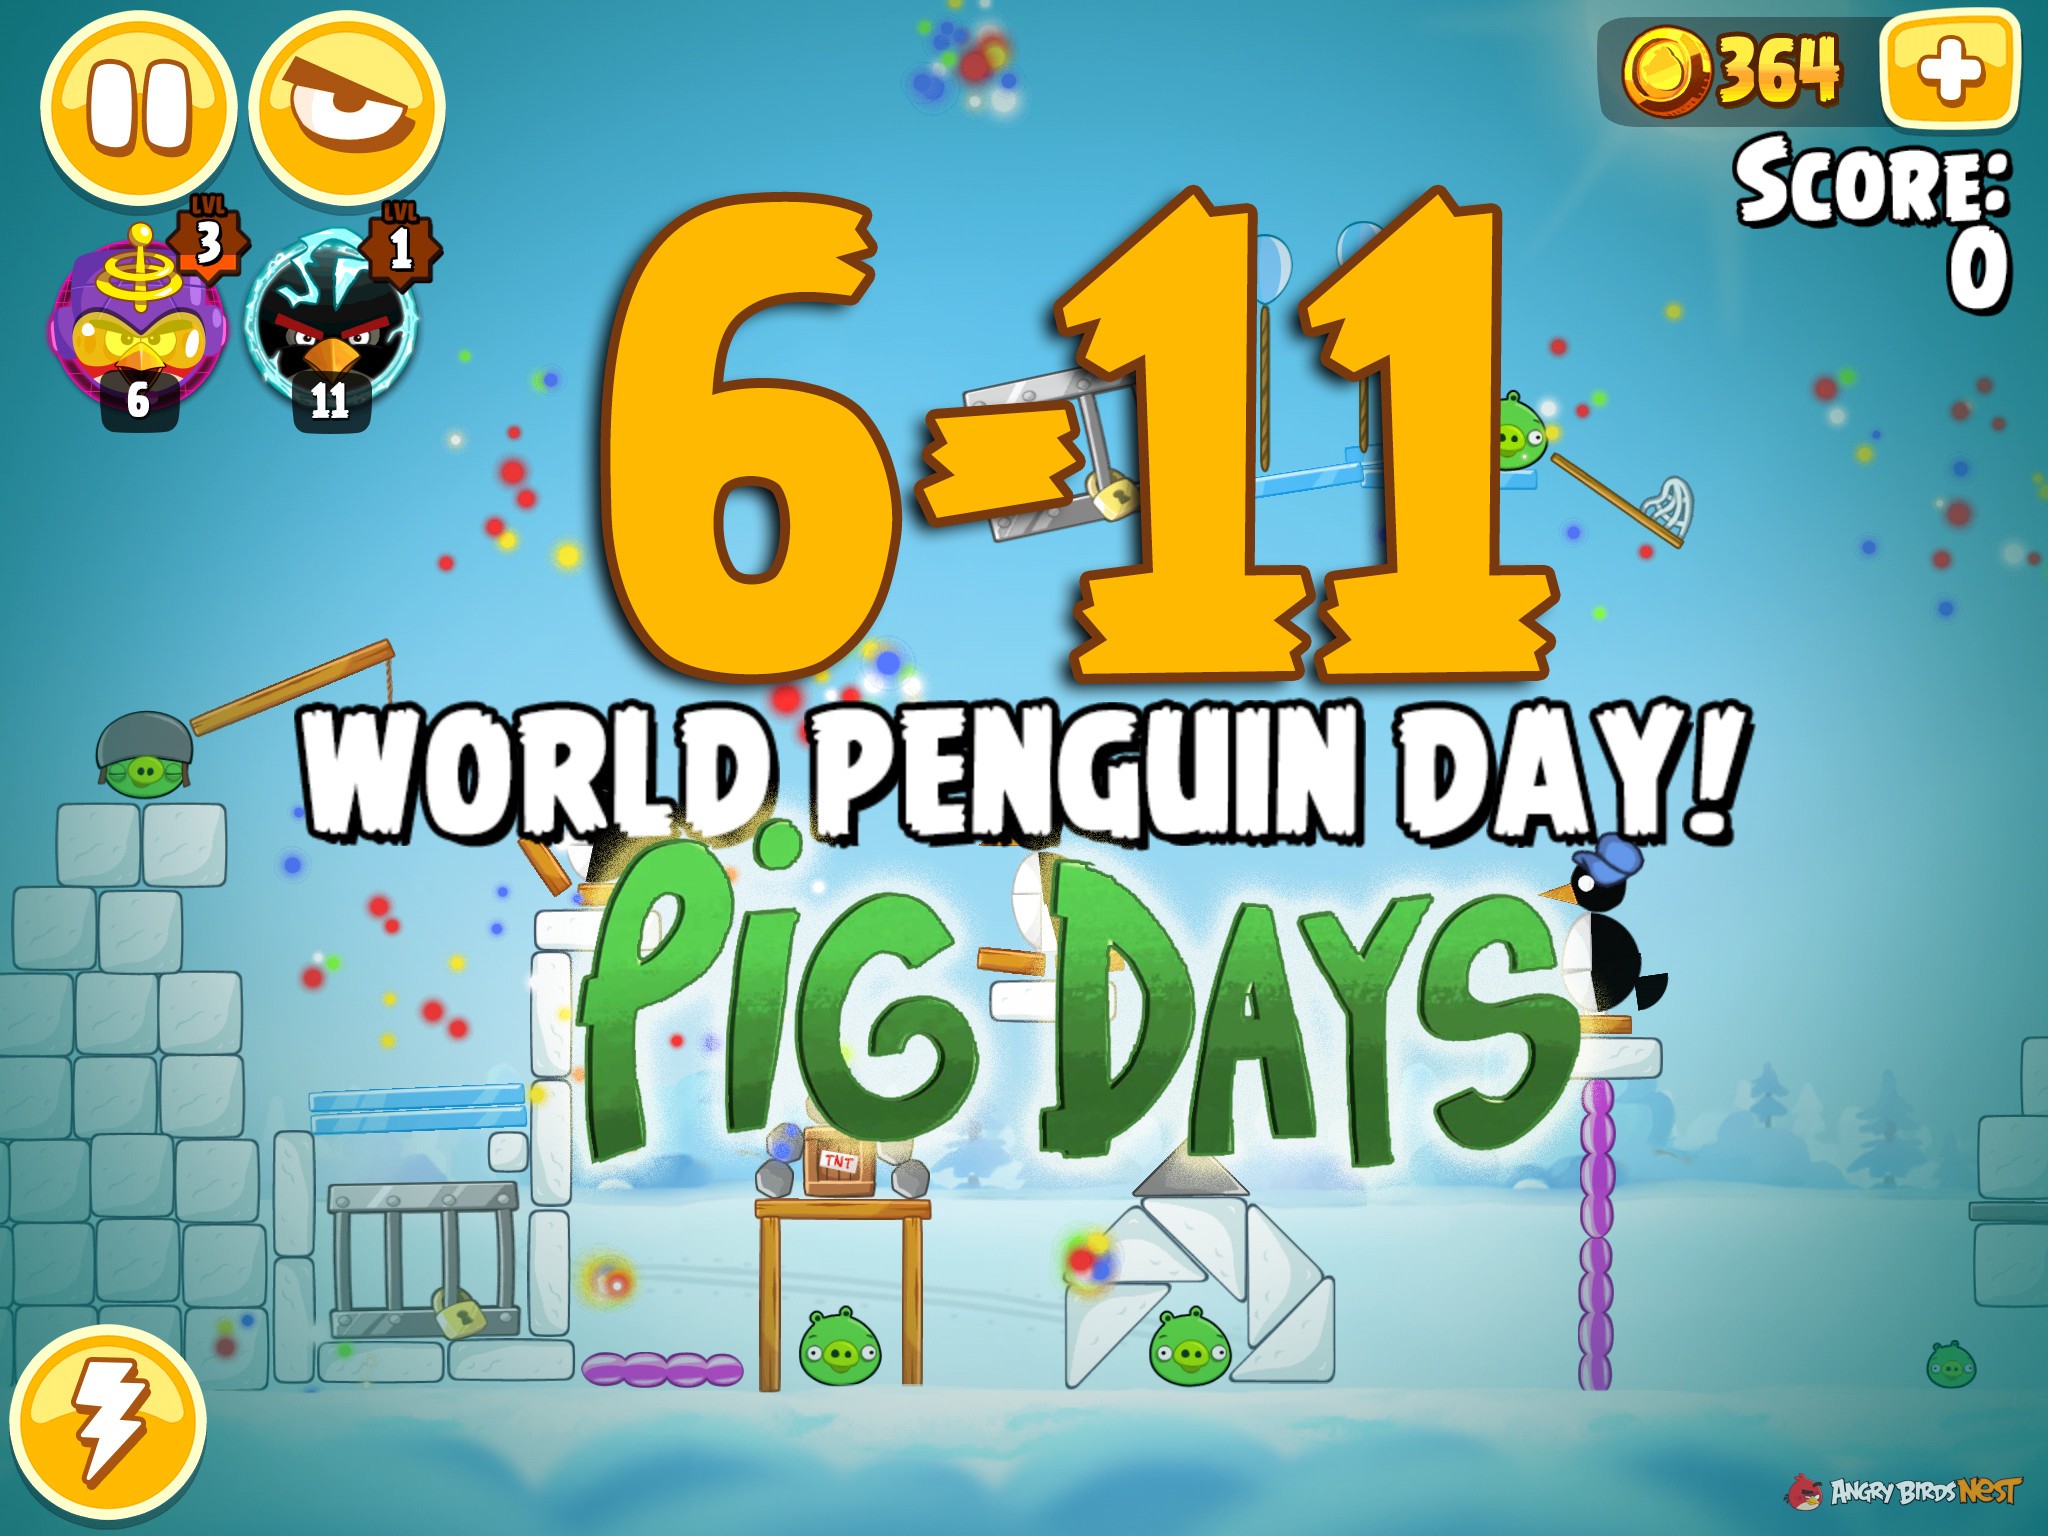 Angry Birds Seasons The Pig Days Level 6-11